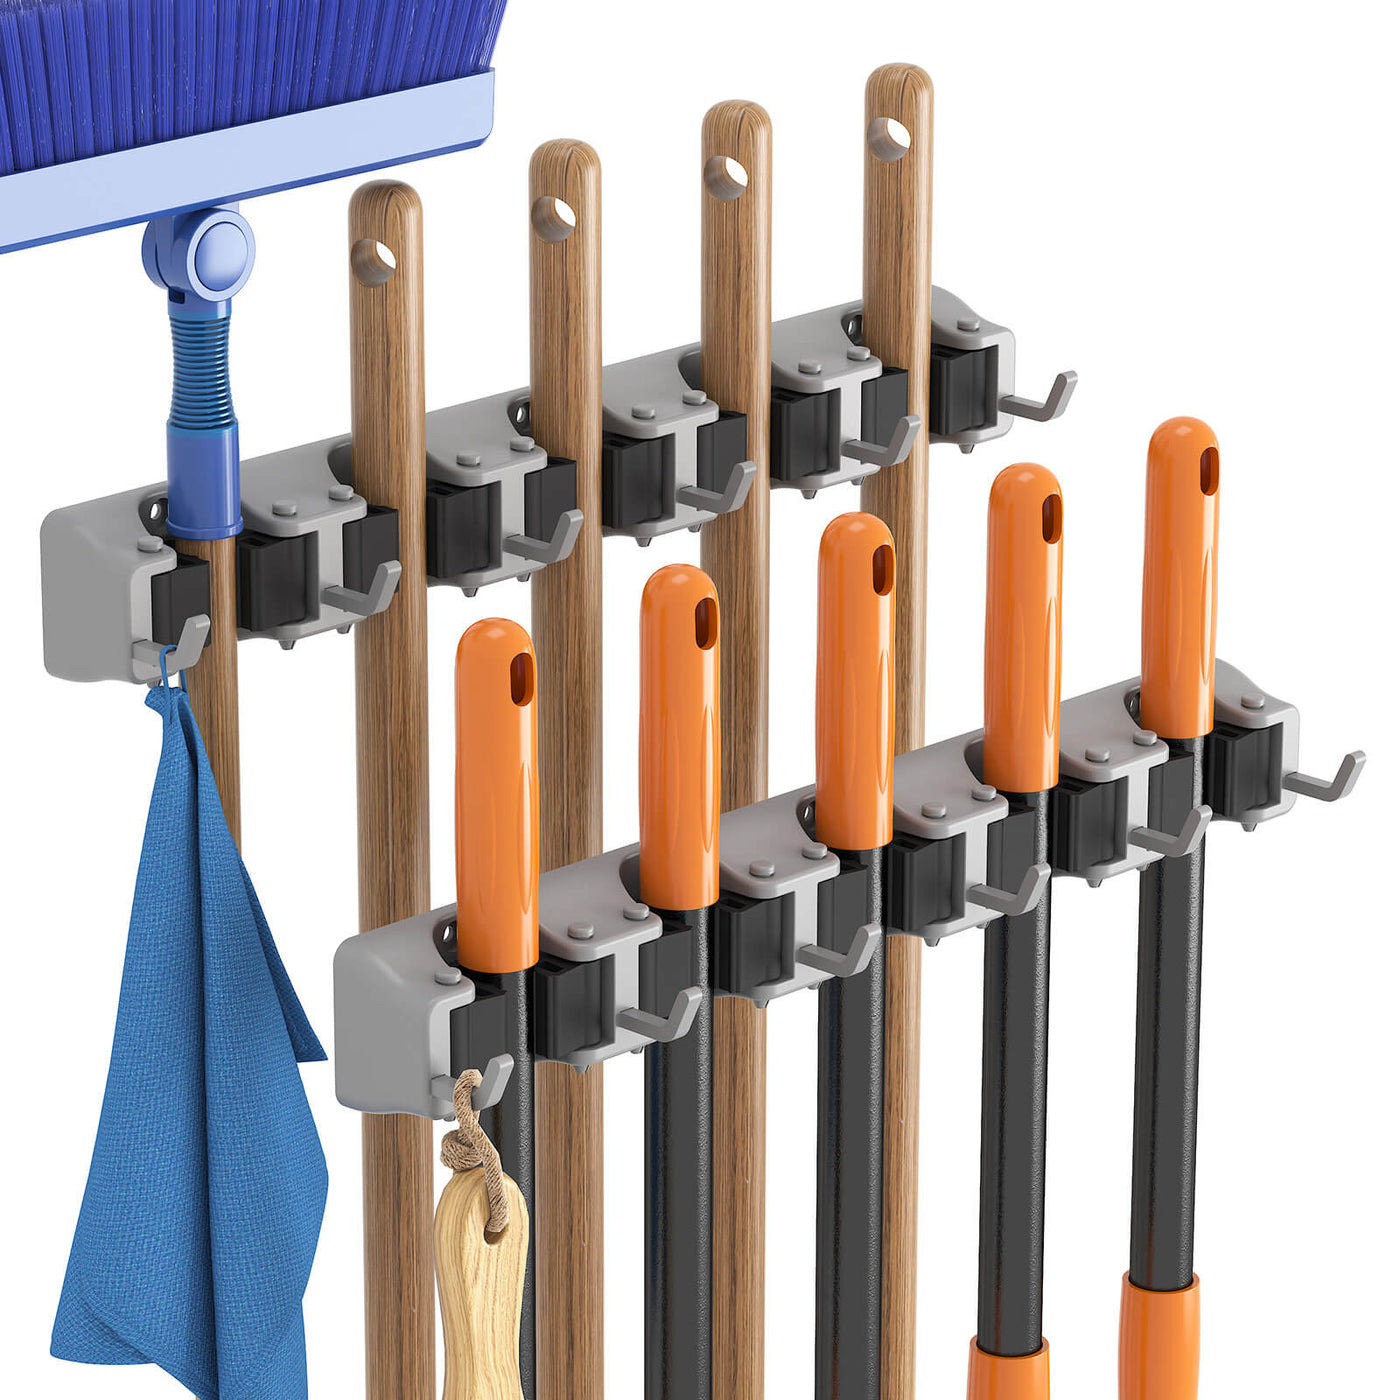 Mop and Broom Holder Wall Mount - Lifewit – Lifewitstore